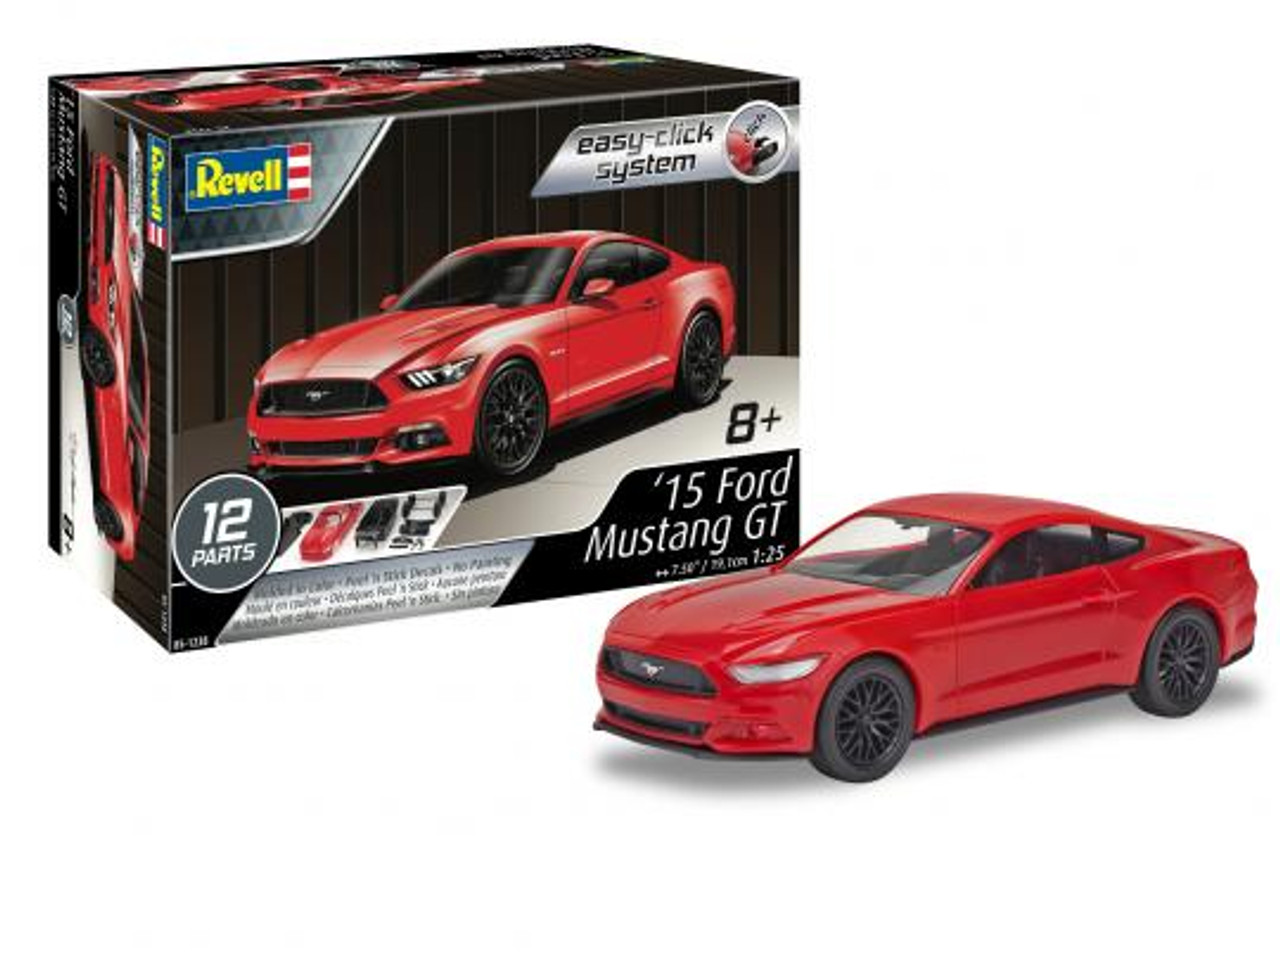 Revell 851238 1:25 2015 Ford Mustang GT Model Kit - Small Addictions RC